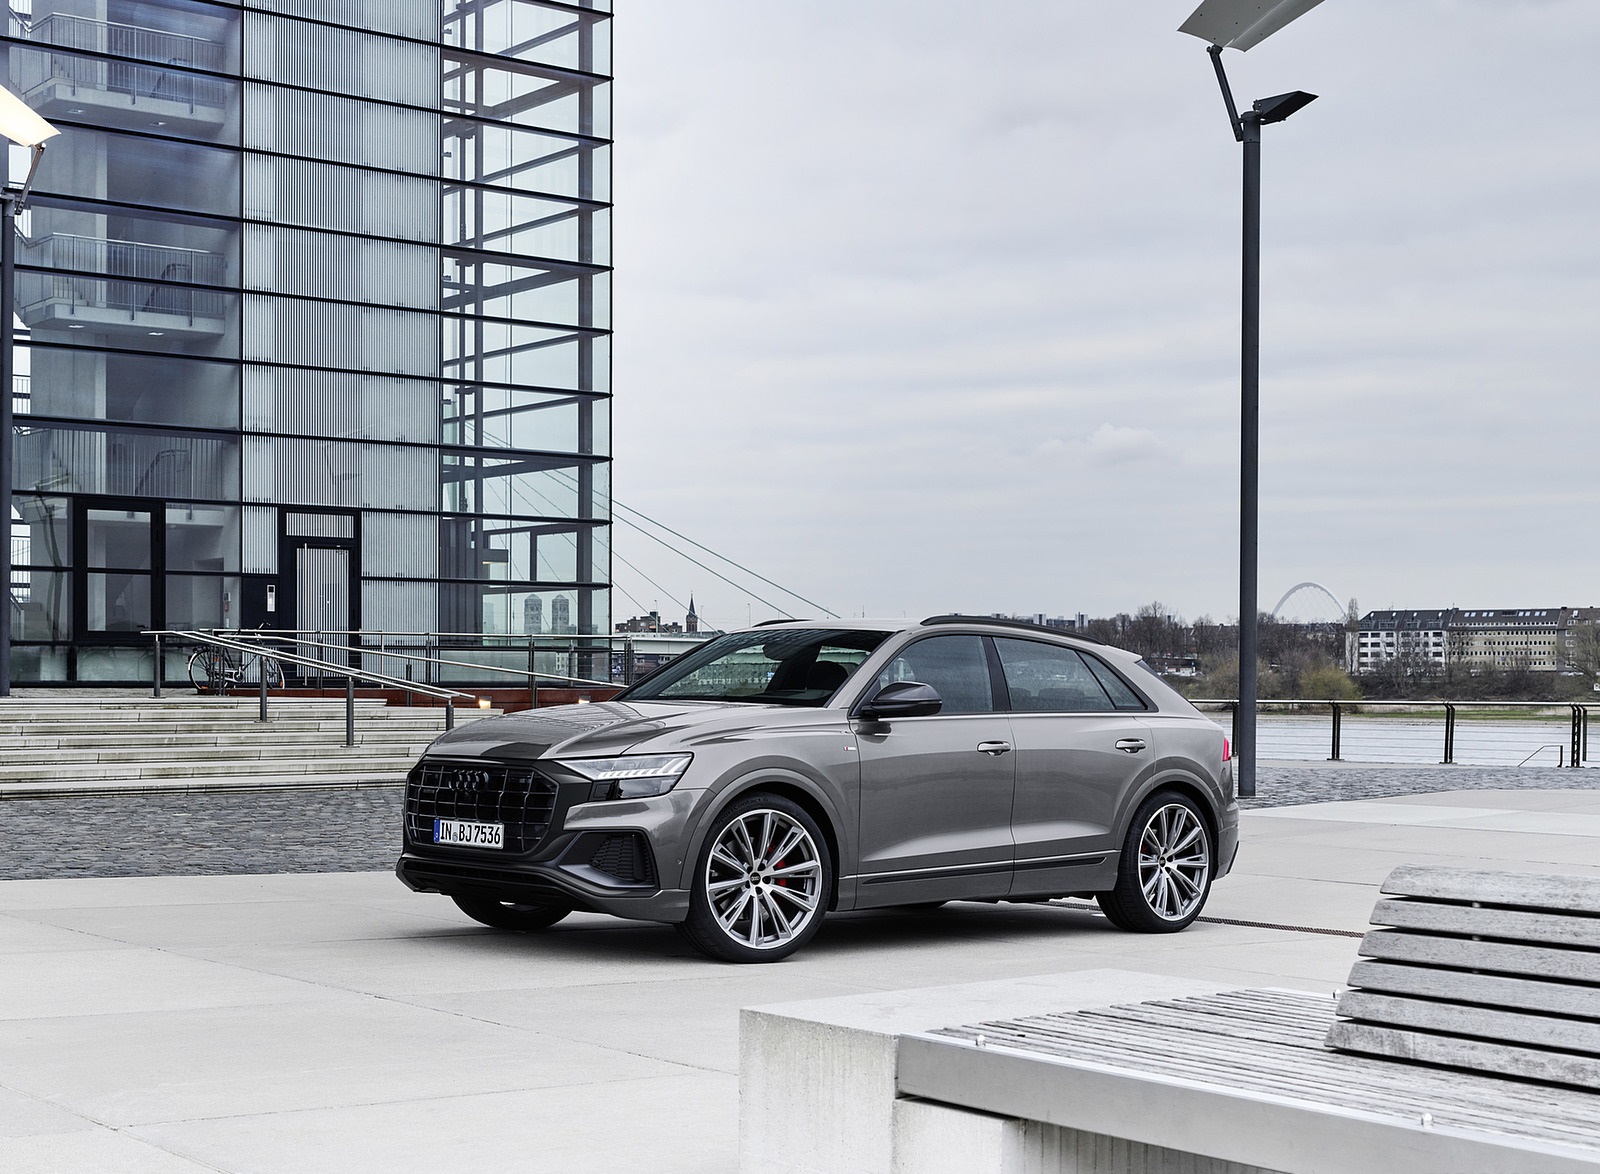 2022 Audi Q8 S Line Competition Plus (Color: Nardo Gray) Front Three-Quarter Wallpapers  #20 of 34